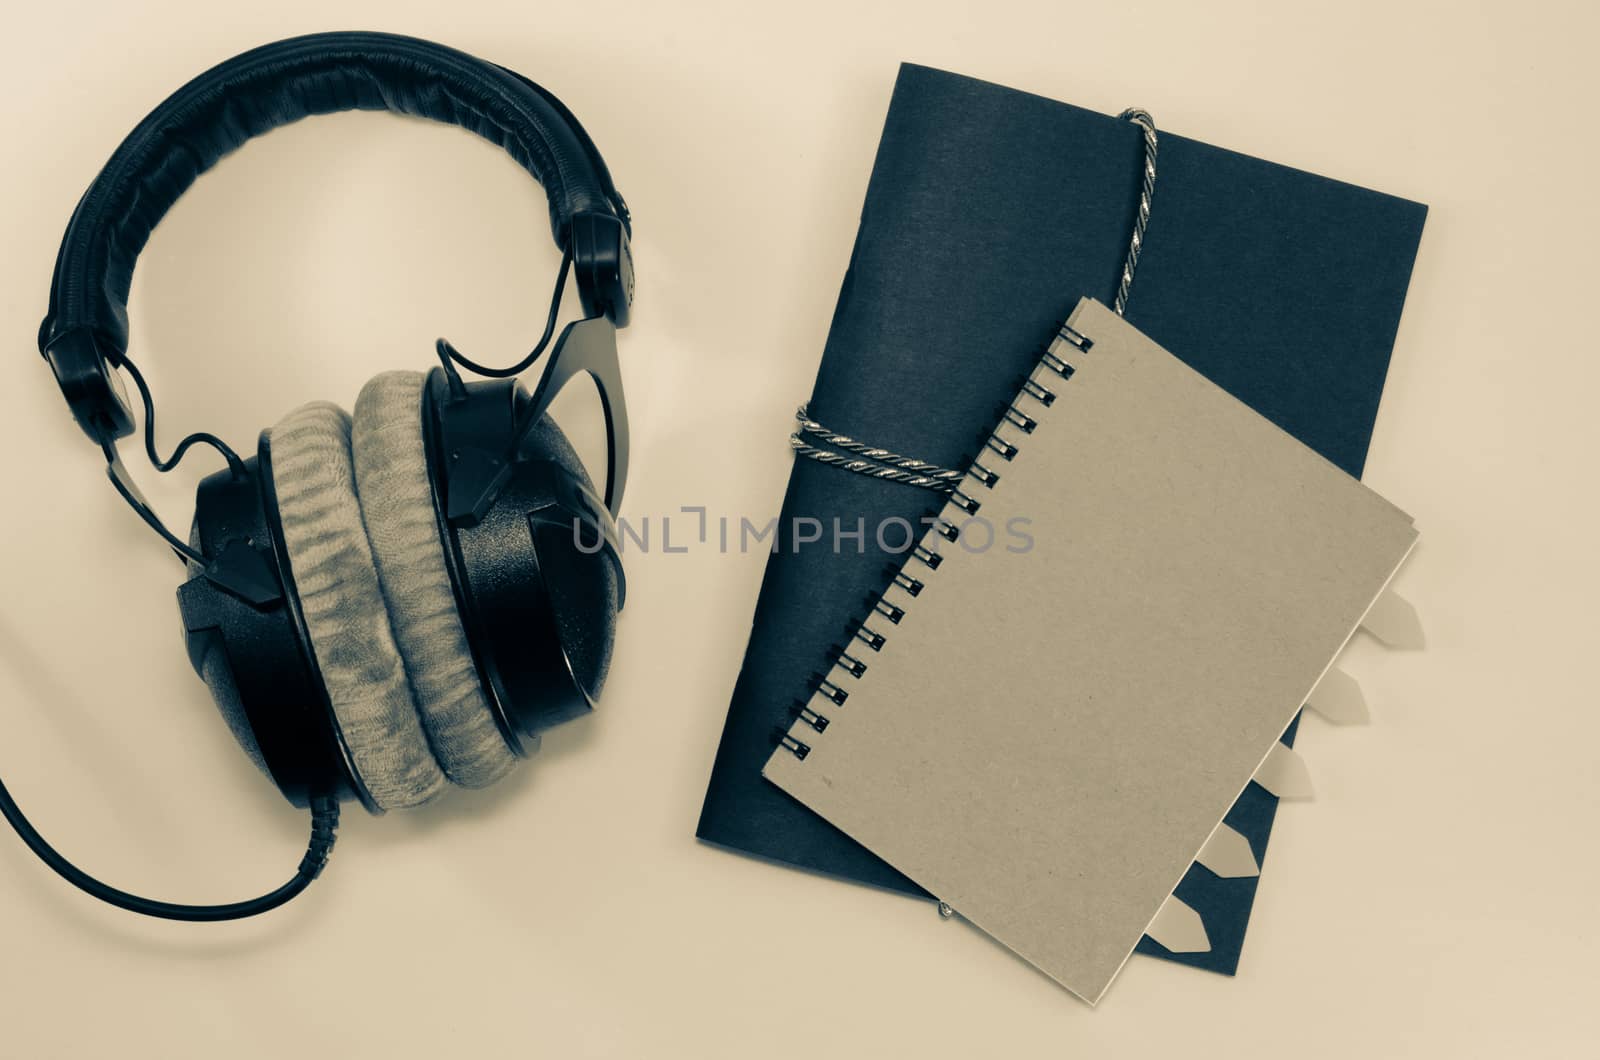 Headphone and notebook front cover on white background